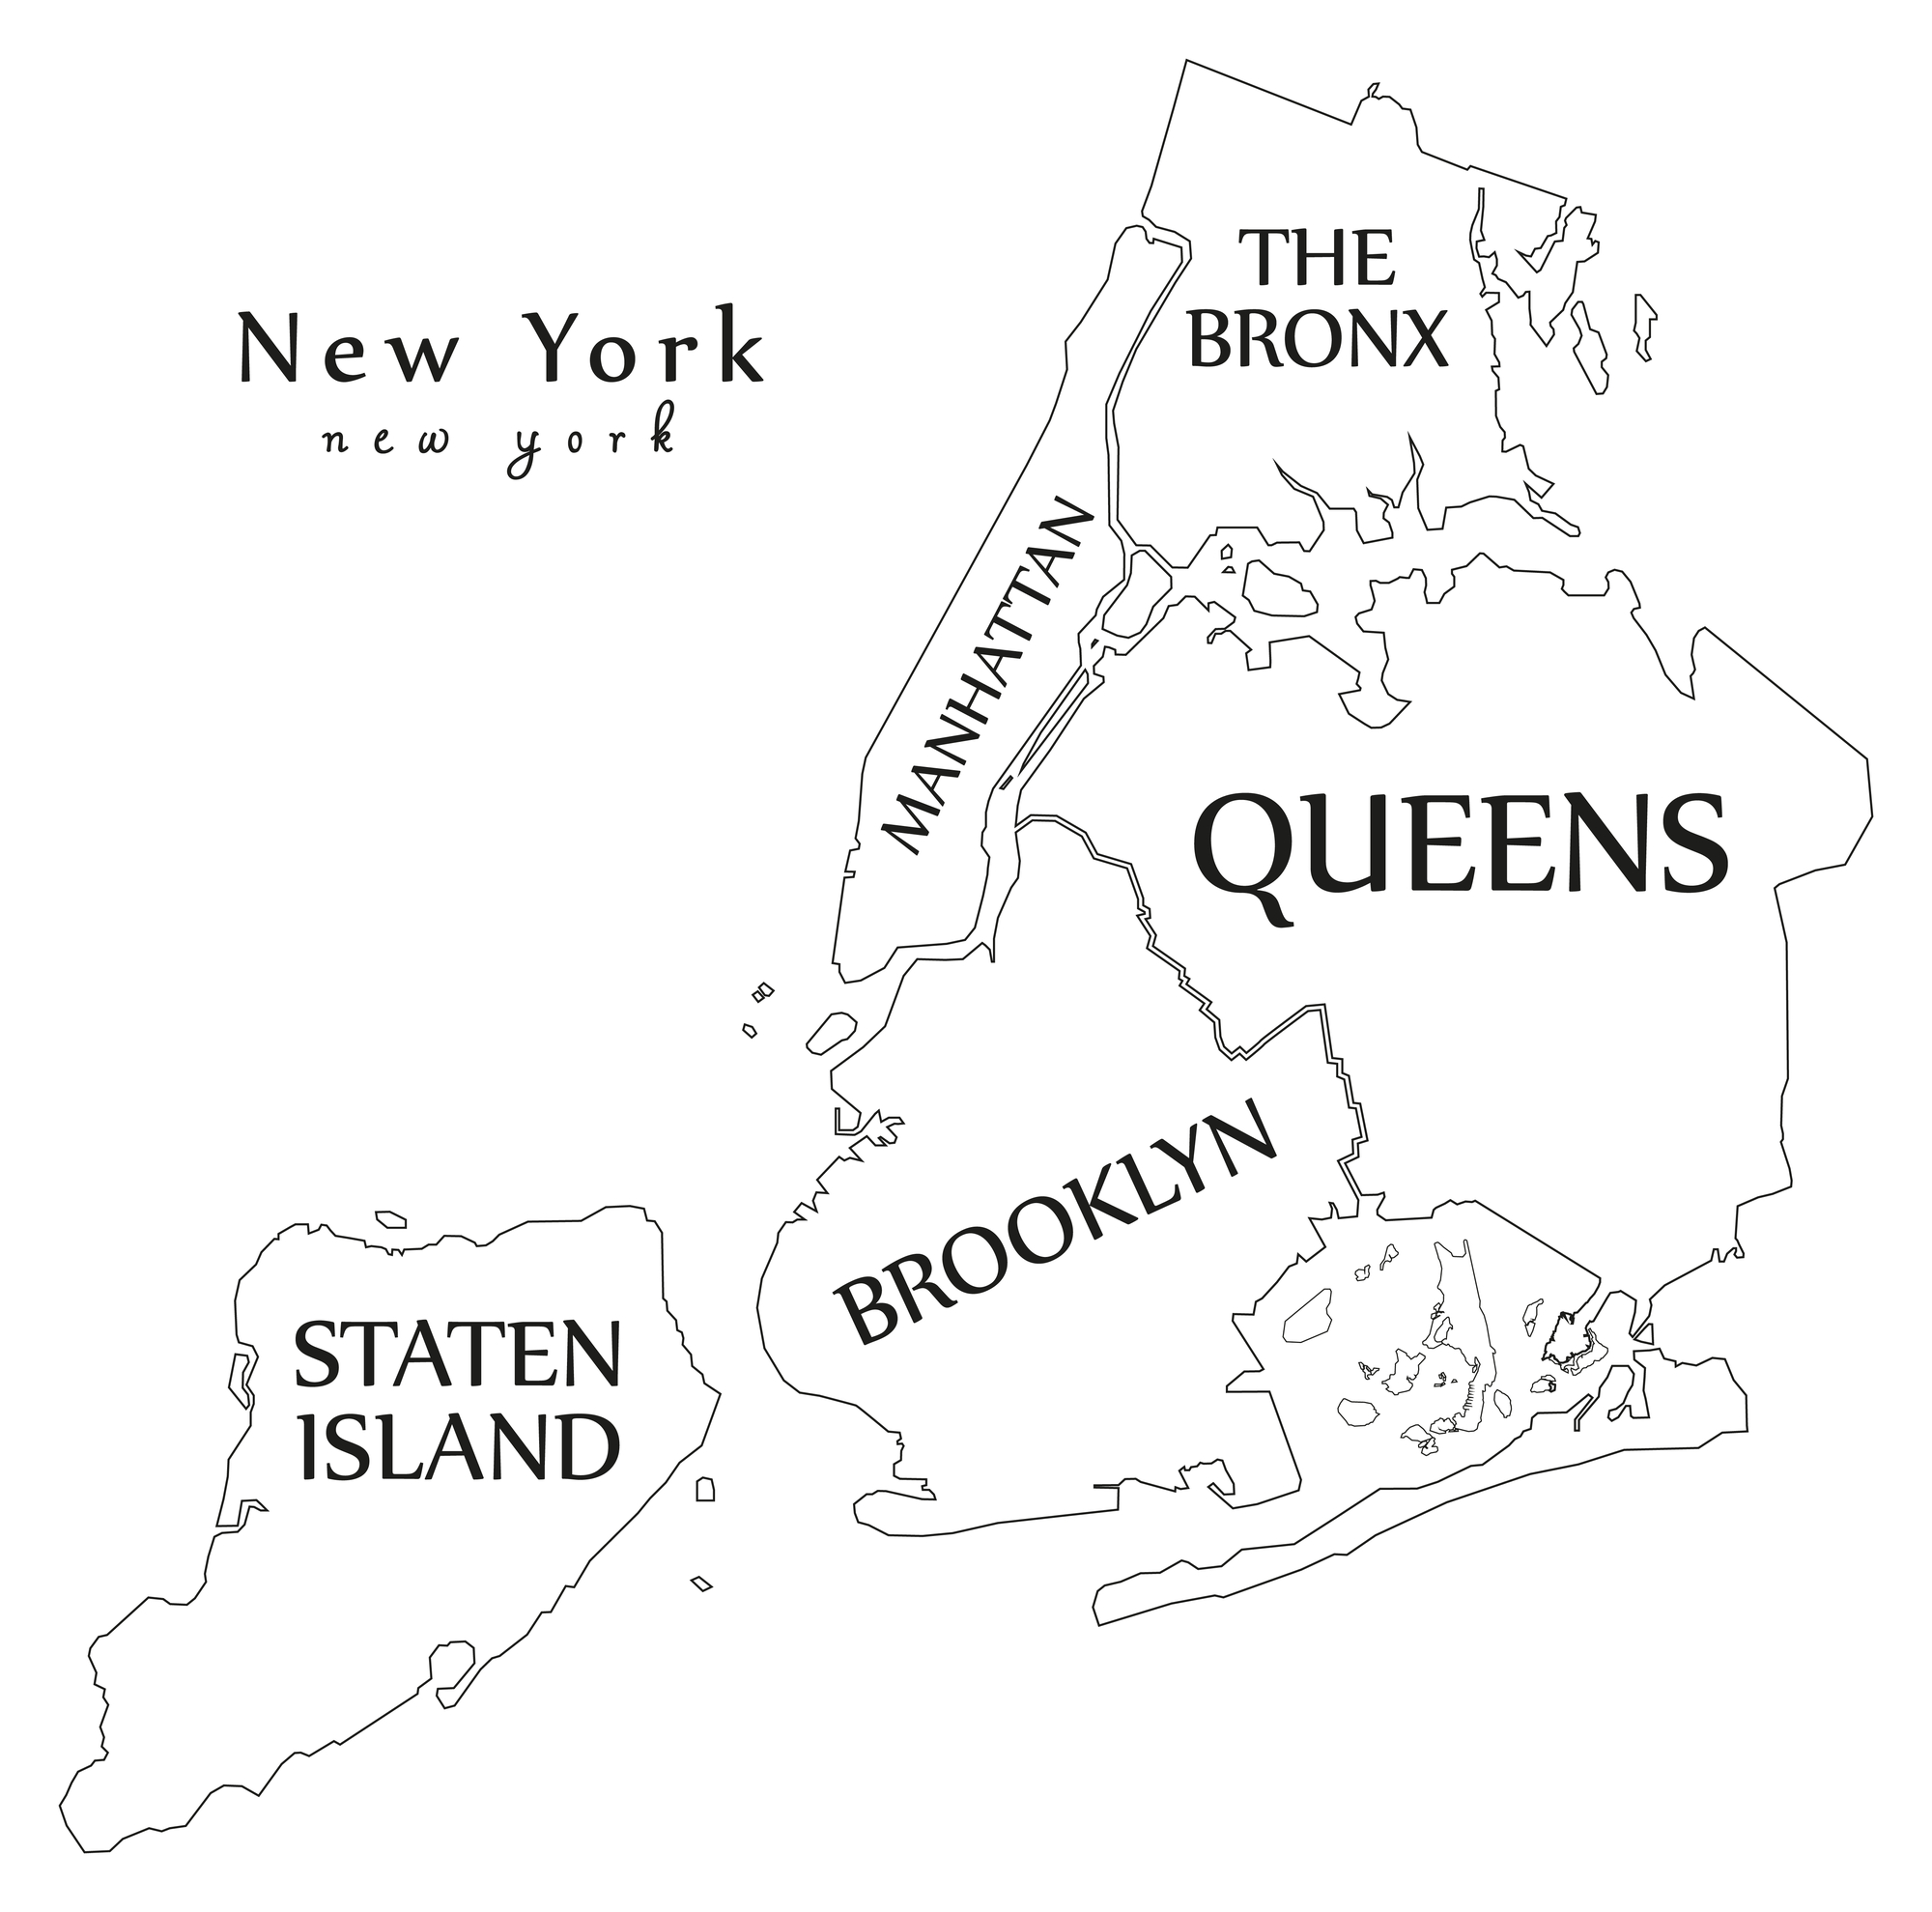 Modern City Map - New York city of the USA with boroughs